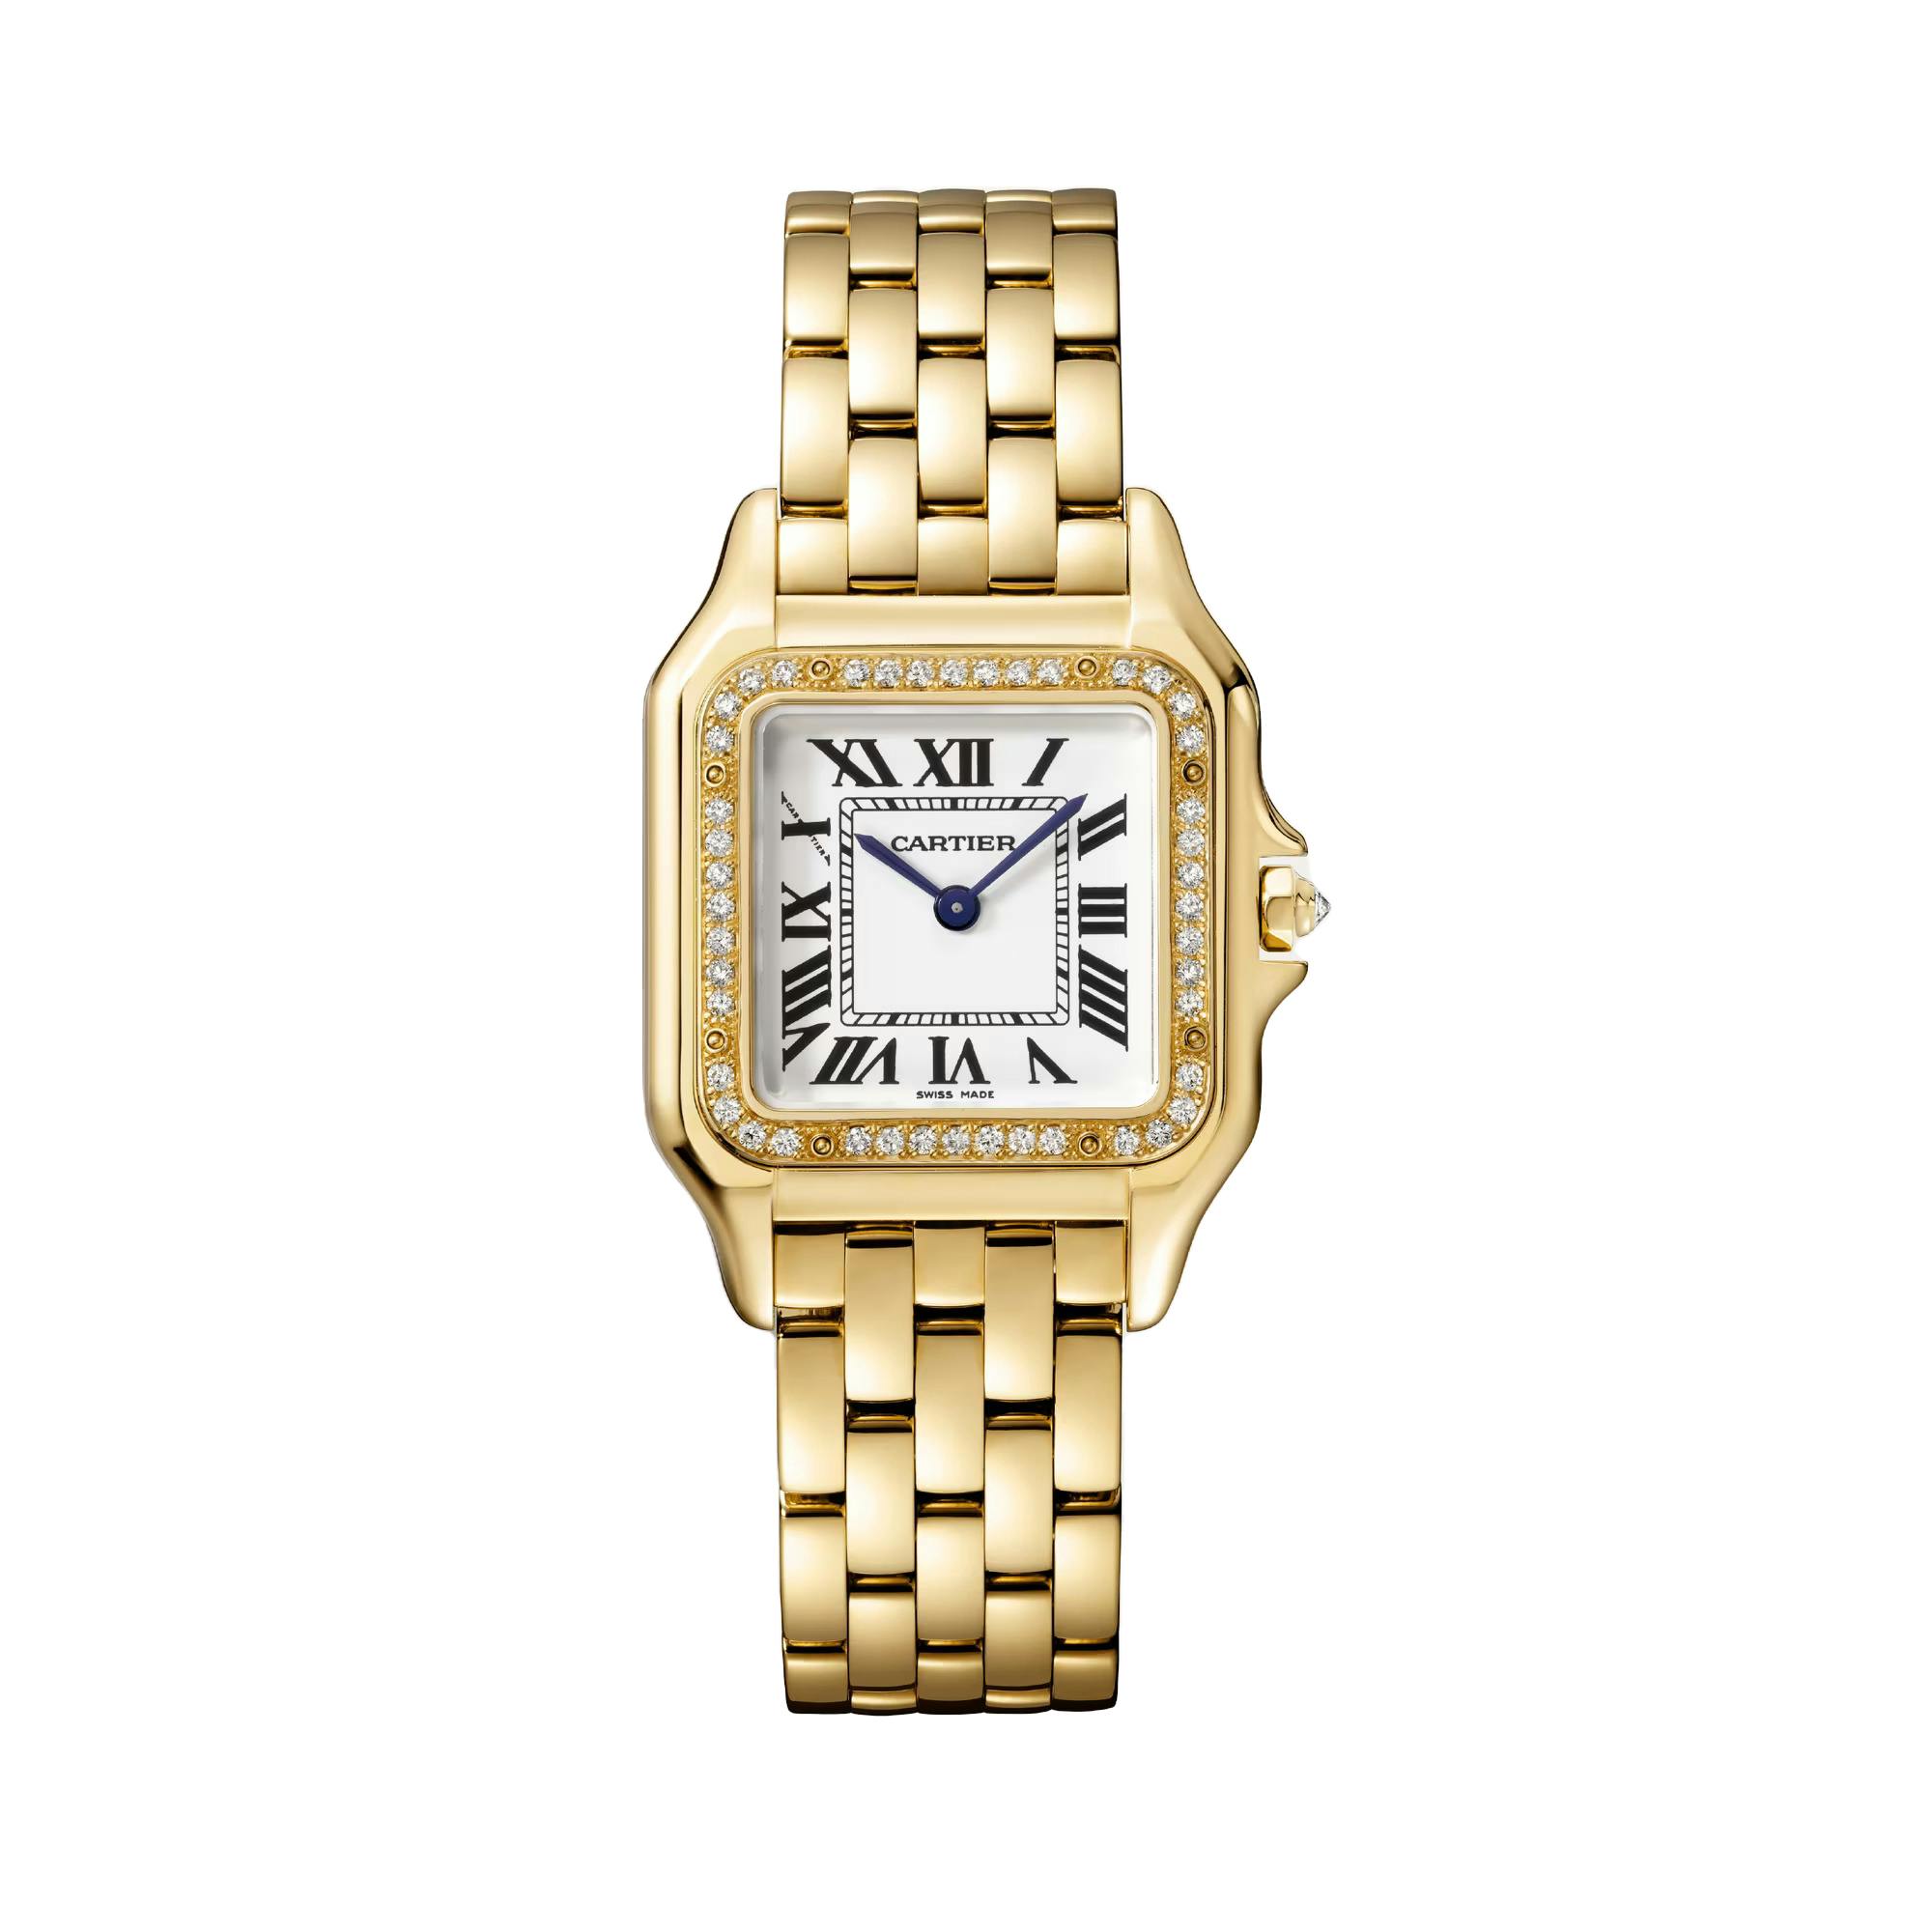 Panthere de Cartier Watch in Yellow Gold with Diamonds, medium model